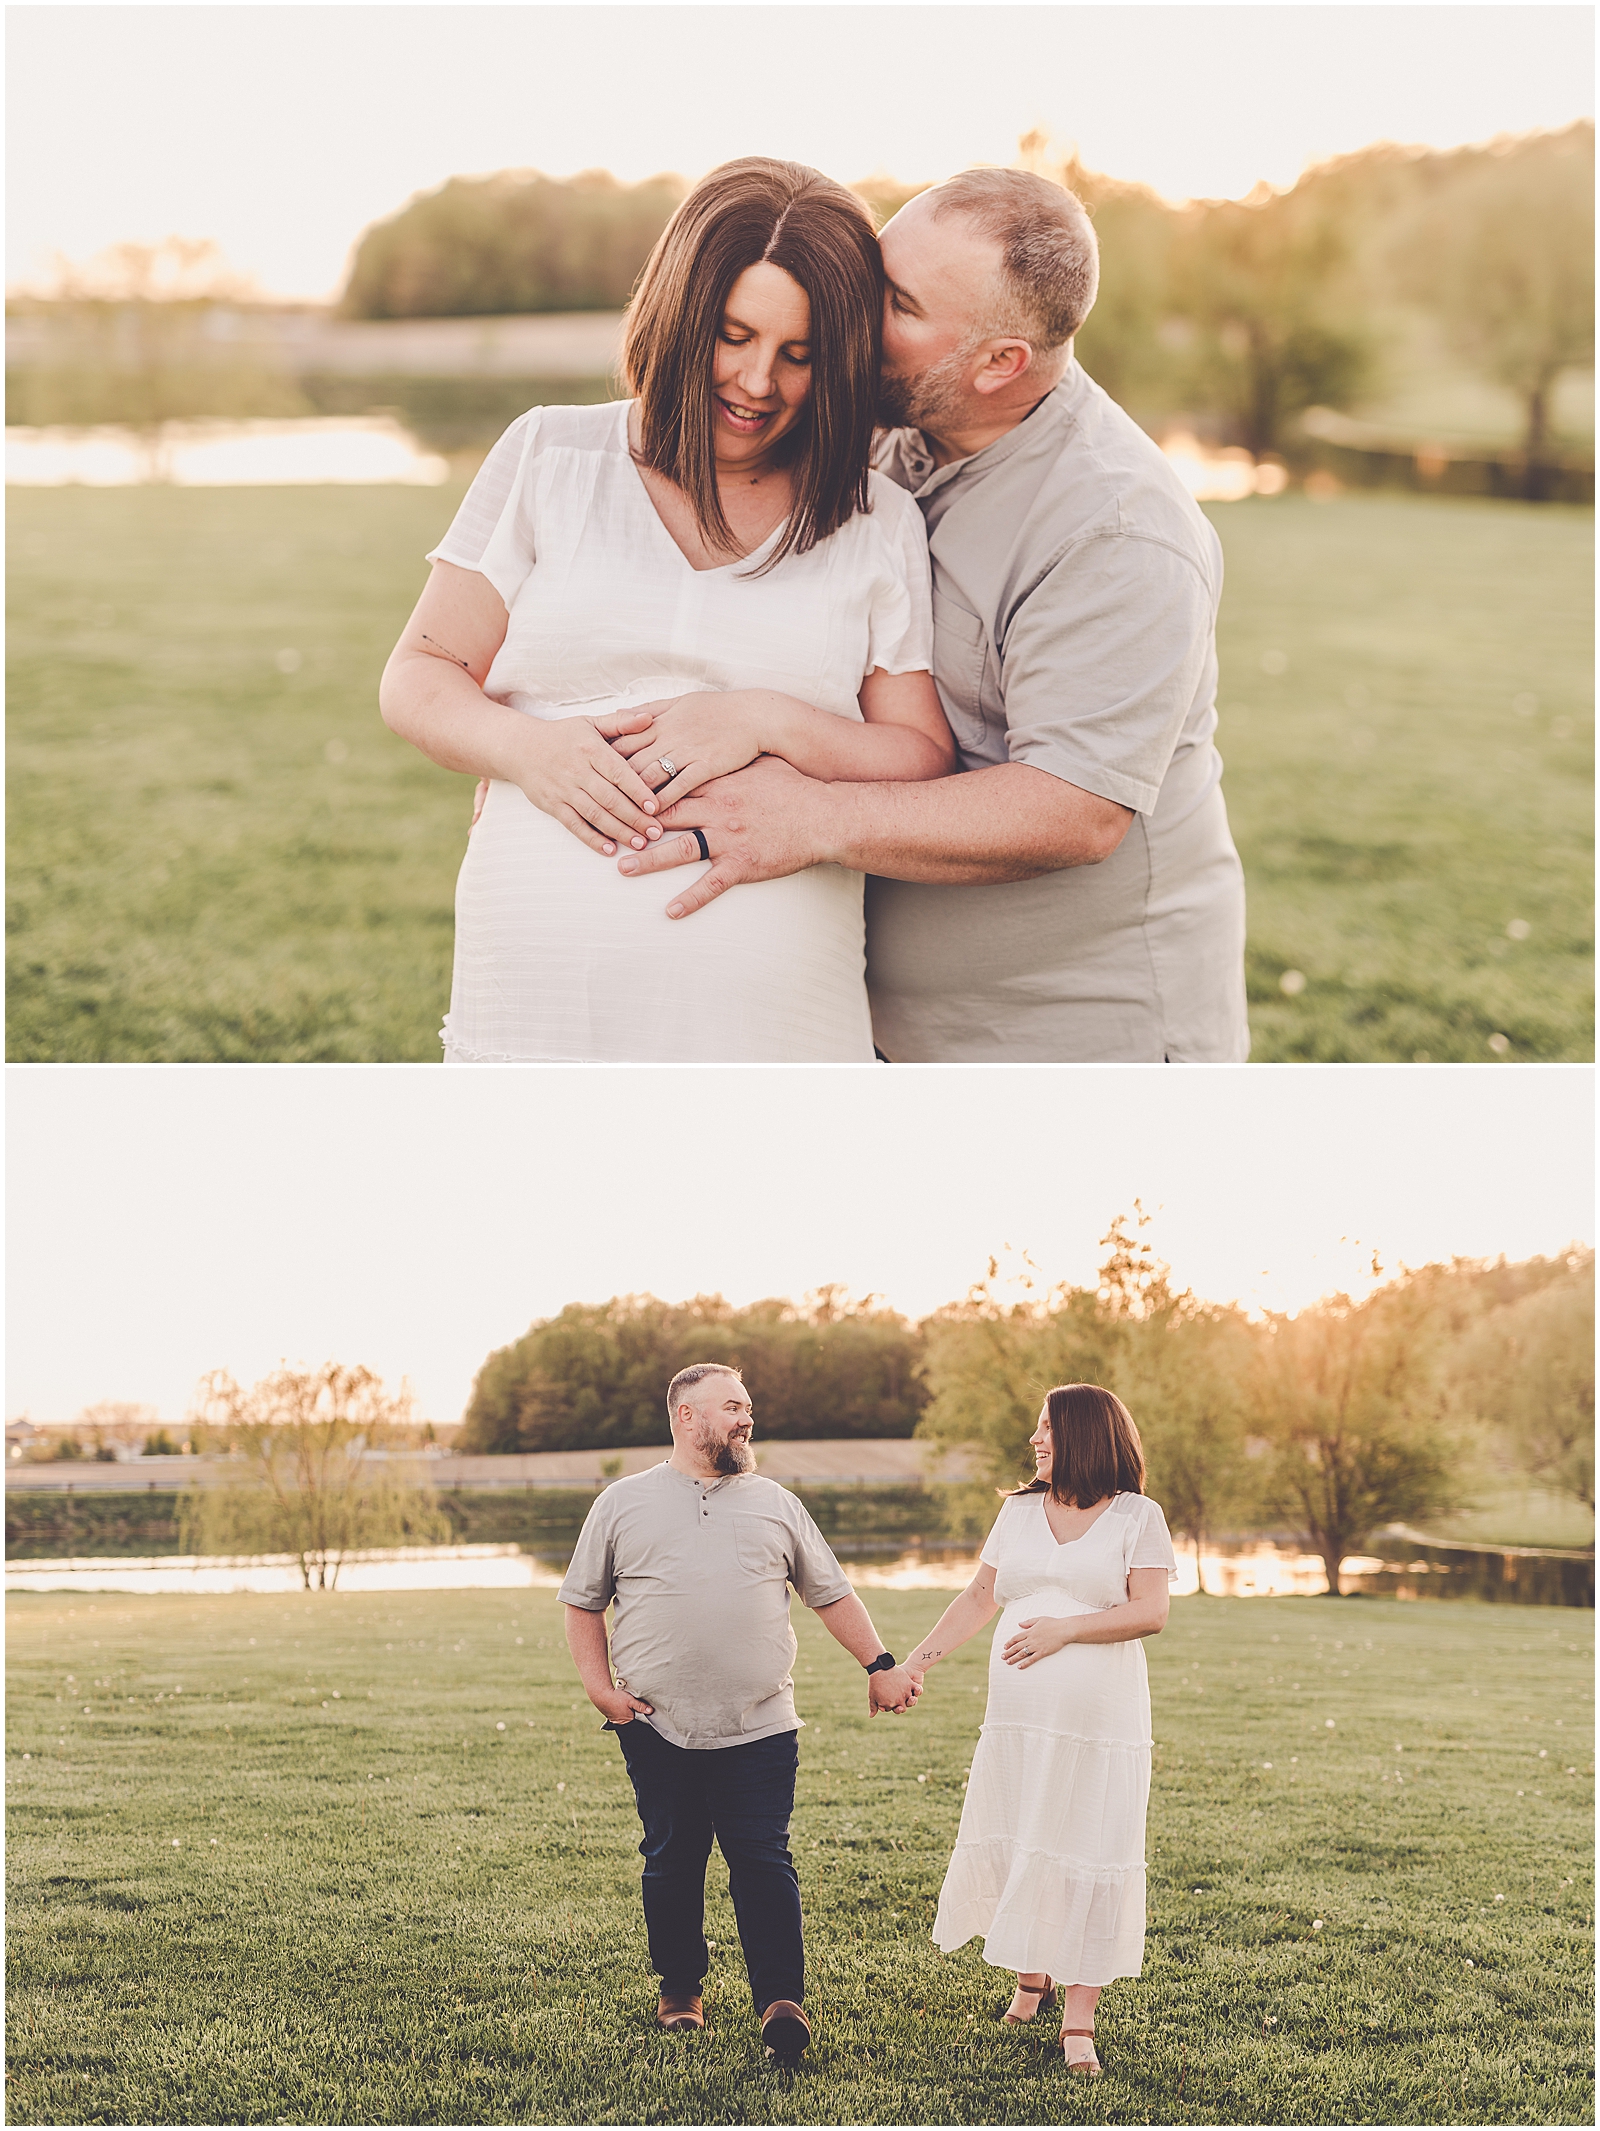 Spring maternity photos in Central Illinois with Chicagoland family photographer Kara Evans Photographer.